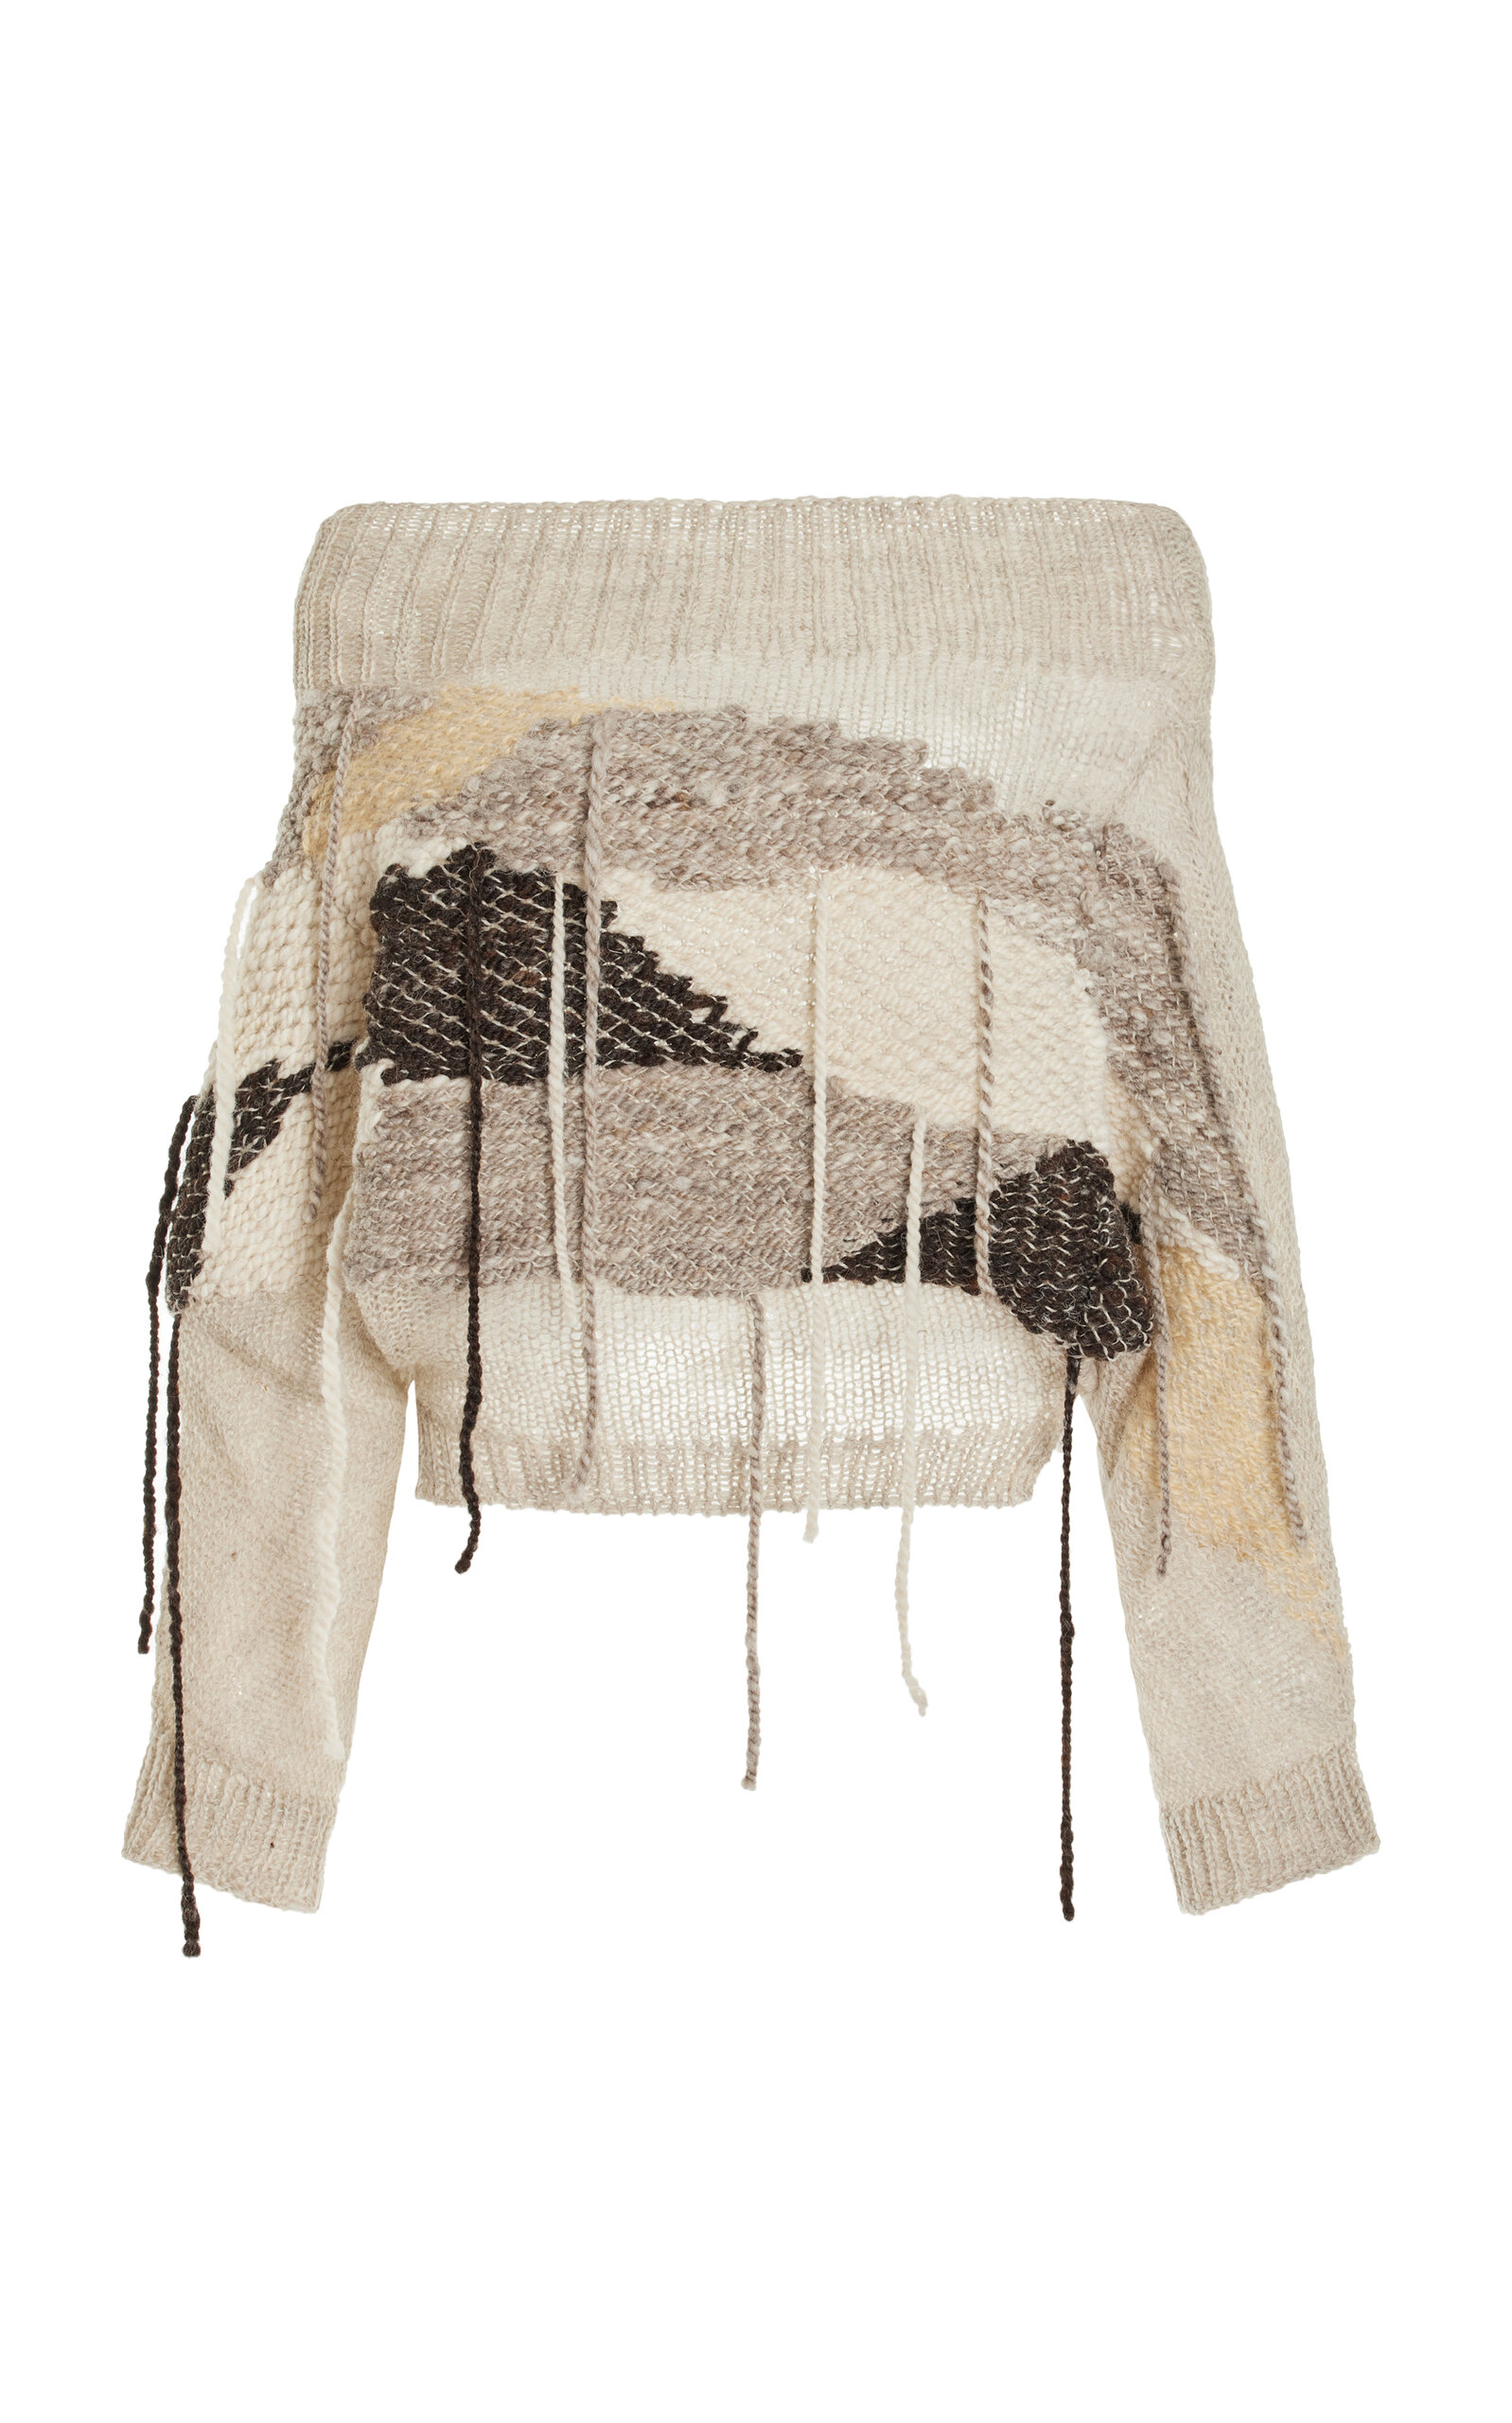 Aisling Camps x Mama Farm Exclusive Duse Wool Sweater